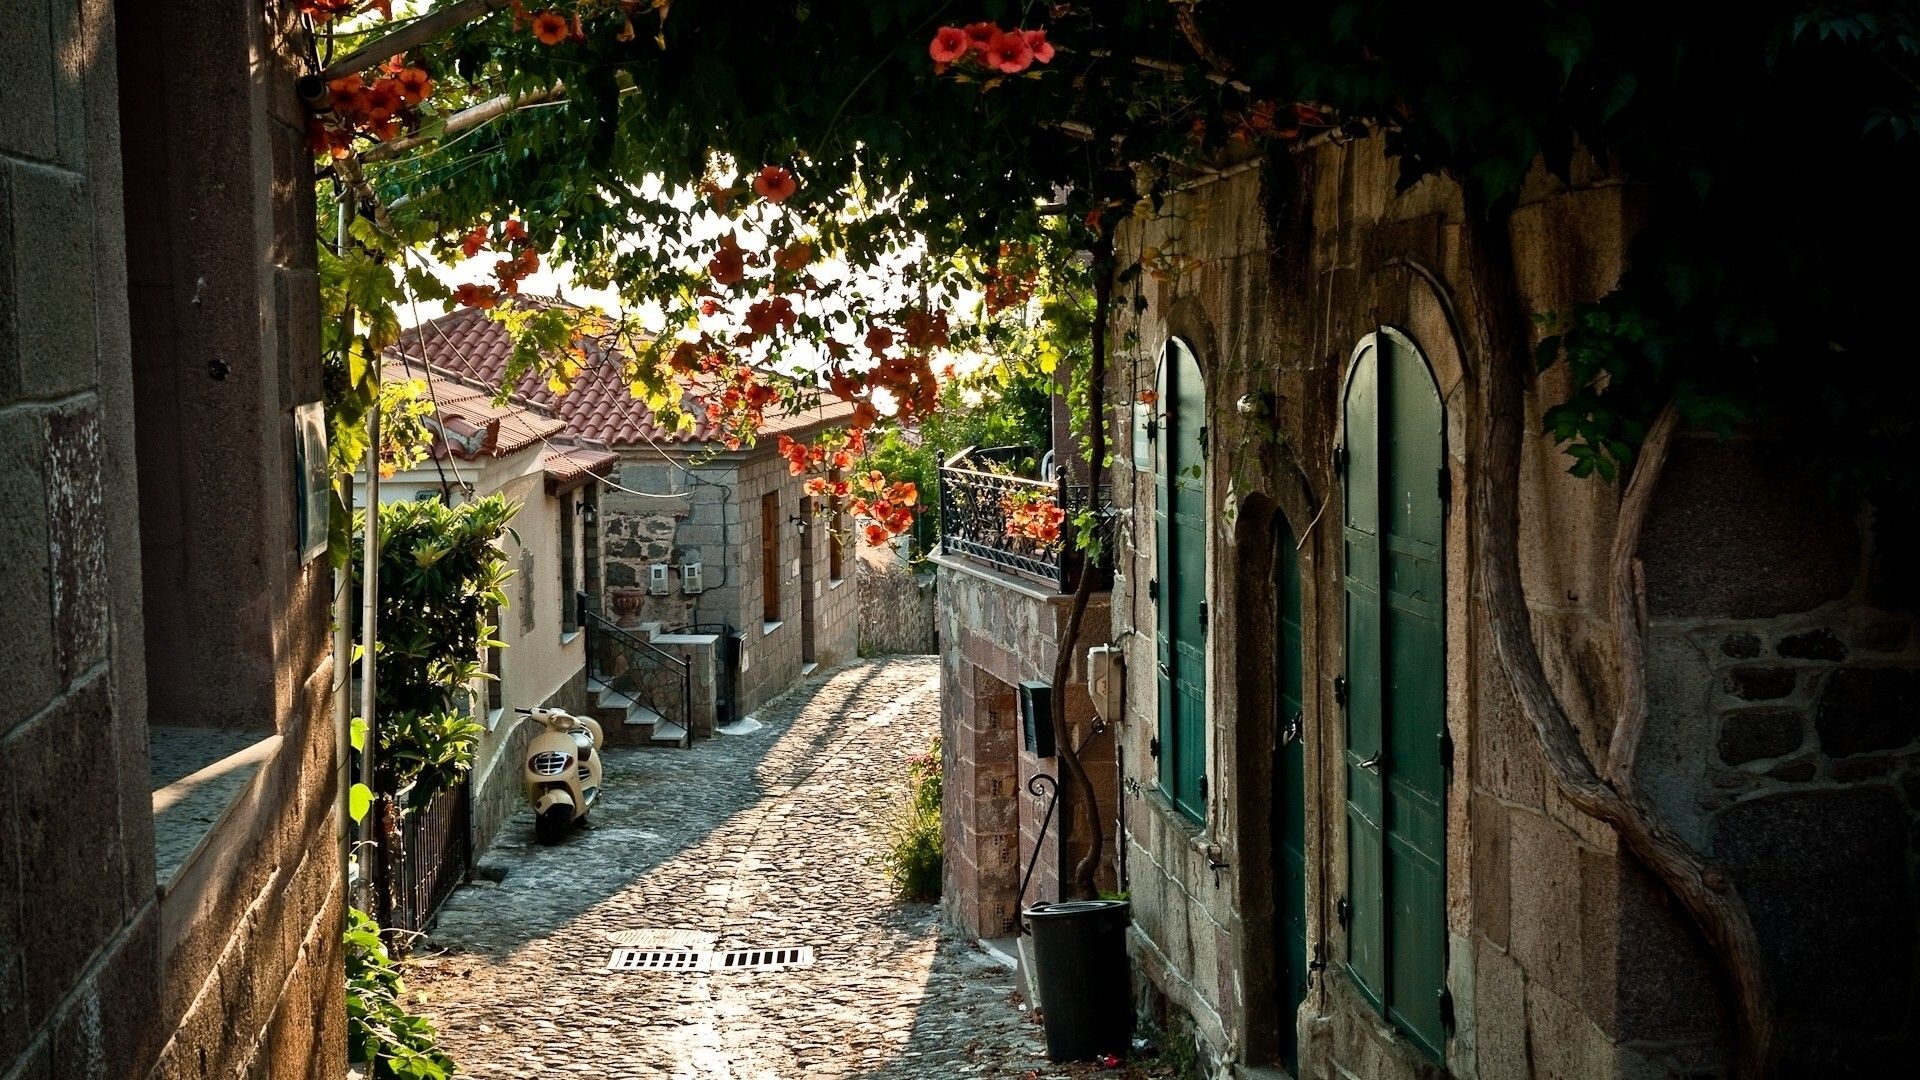 Alley: Narrow Italian cobblestone road in the old town, Shady place in the heart of medieval town, Northern Italy. 1920x1080 Full HD Background.